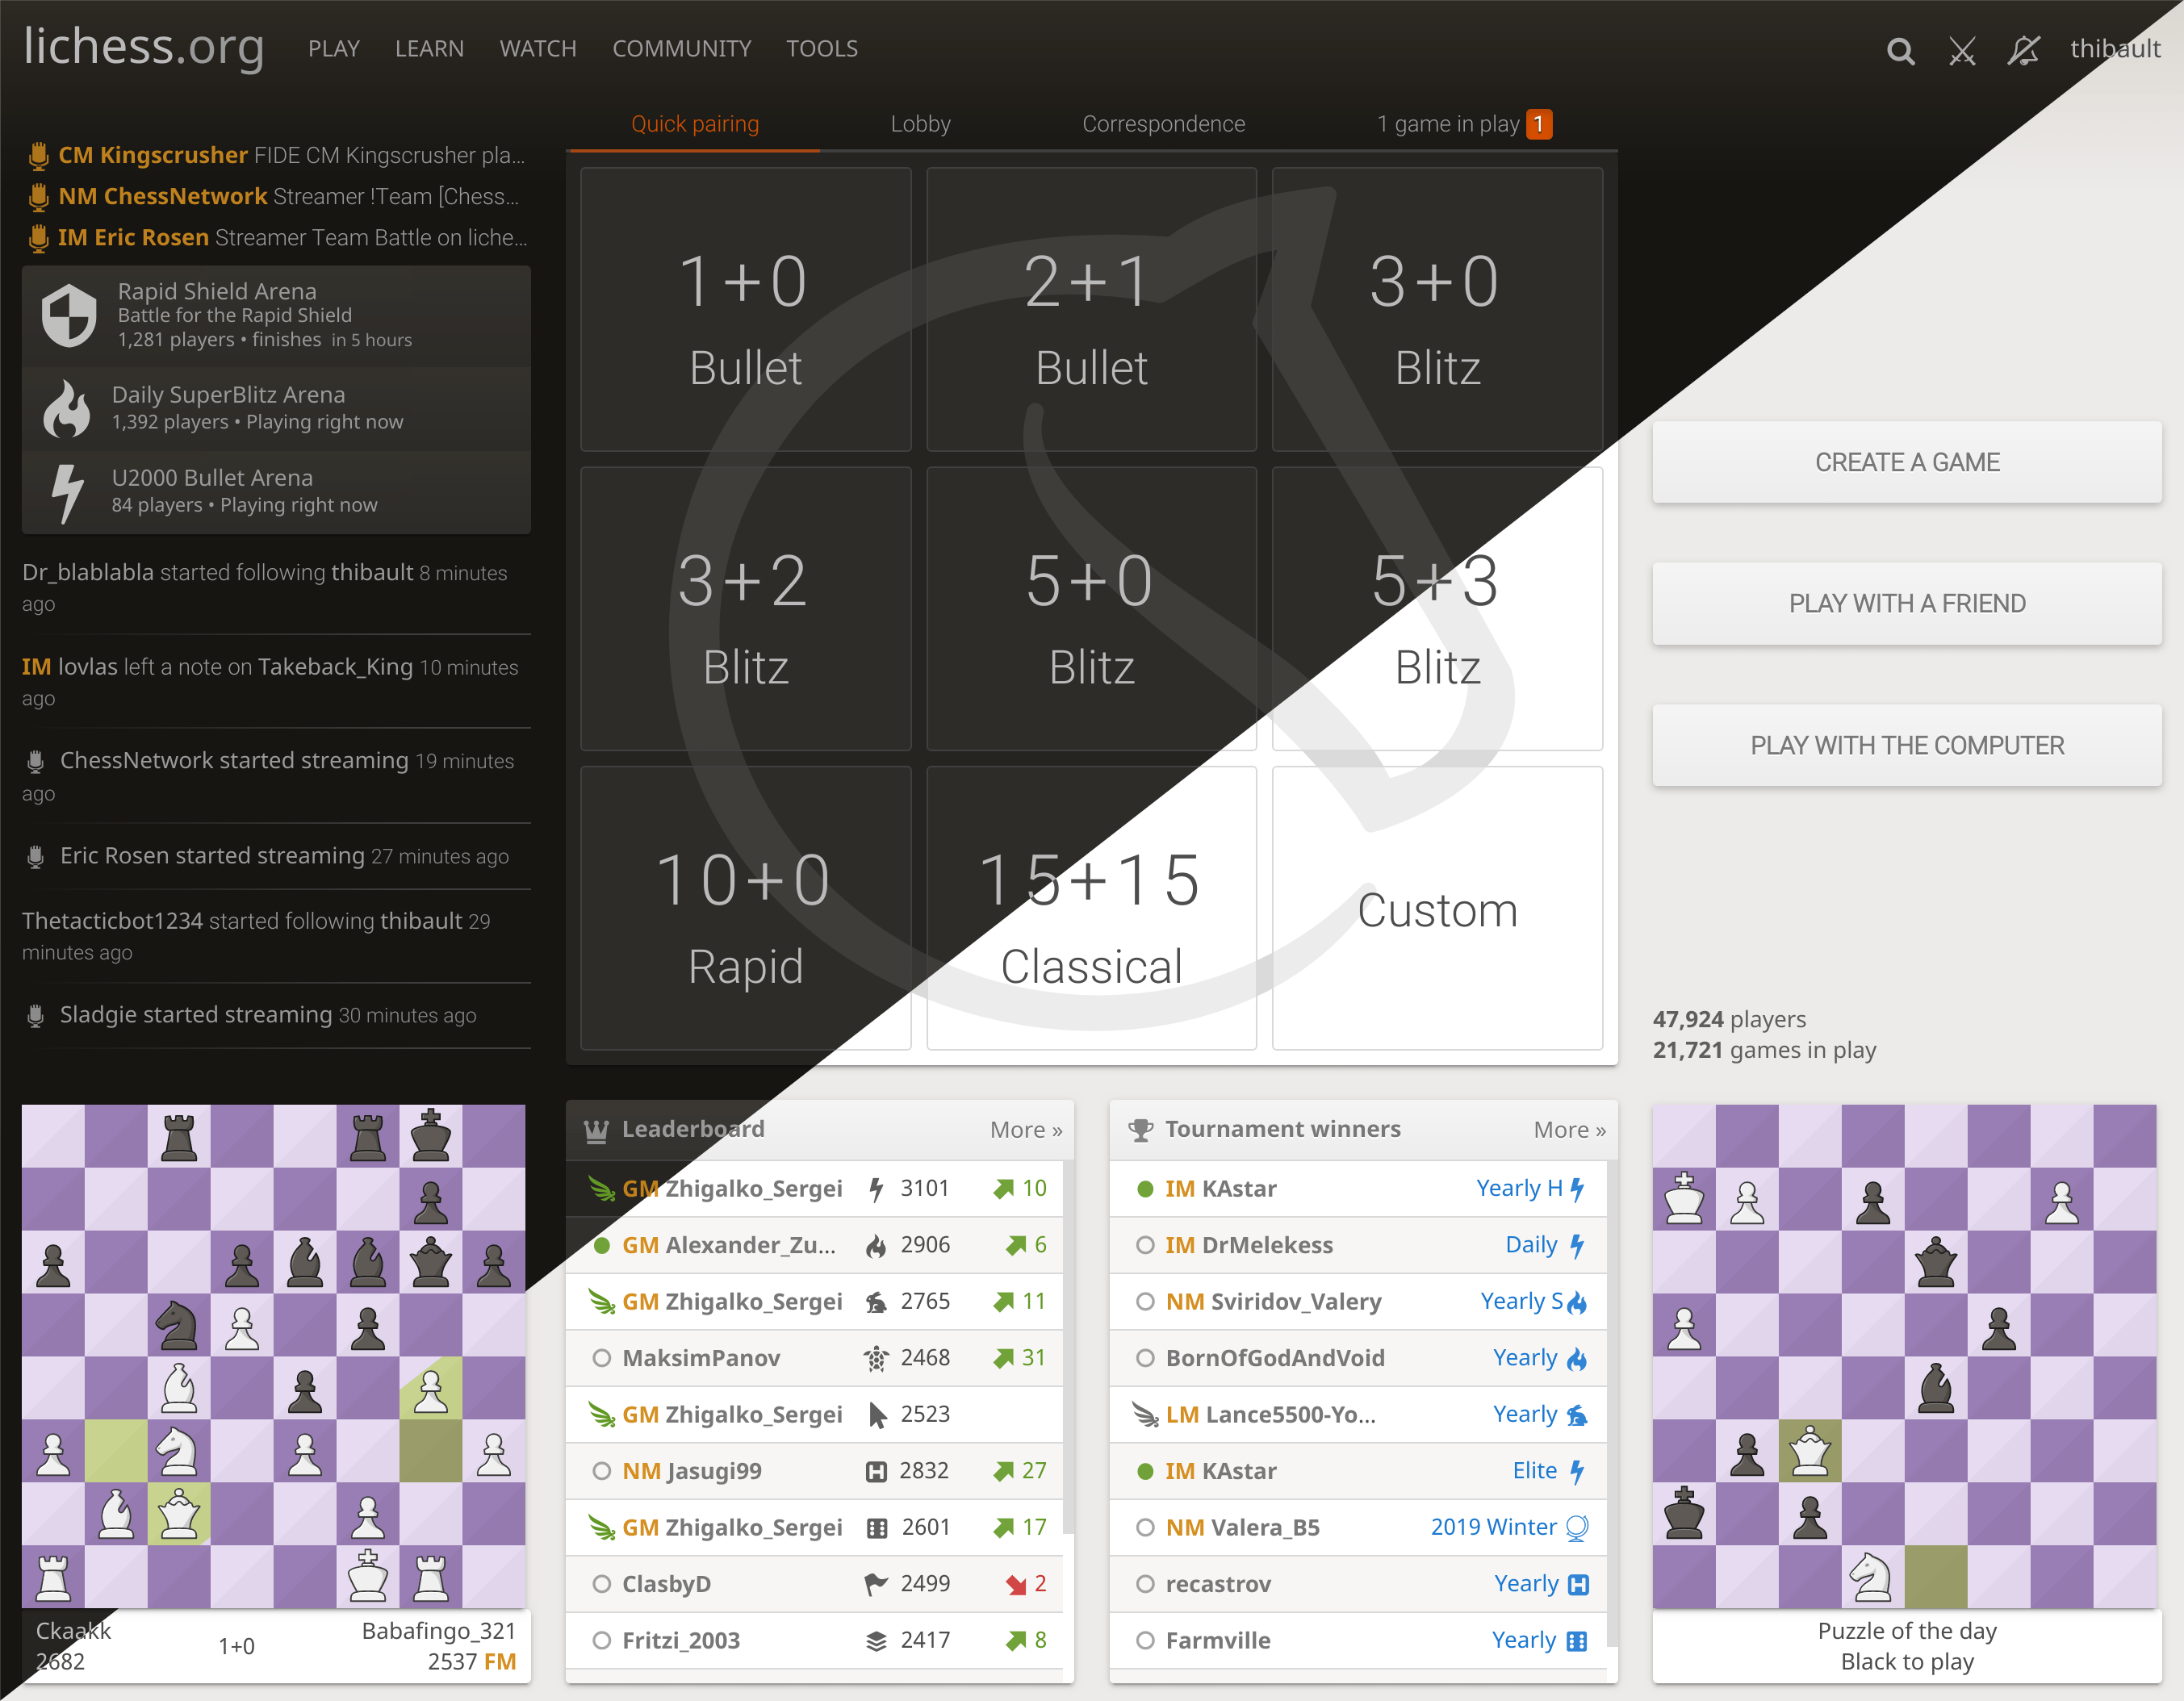 Game stuck, site works otherwise • page 1/1 • Lichess Feedback